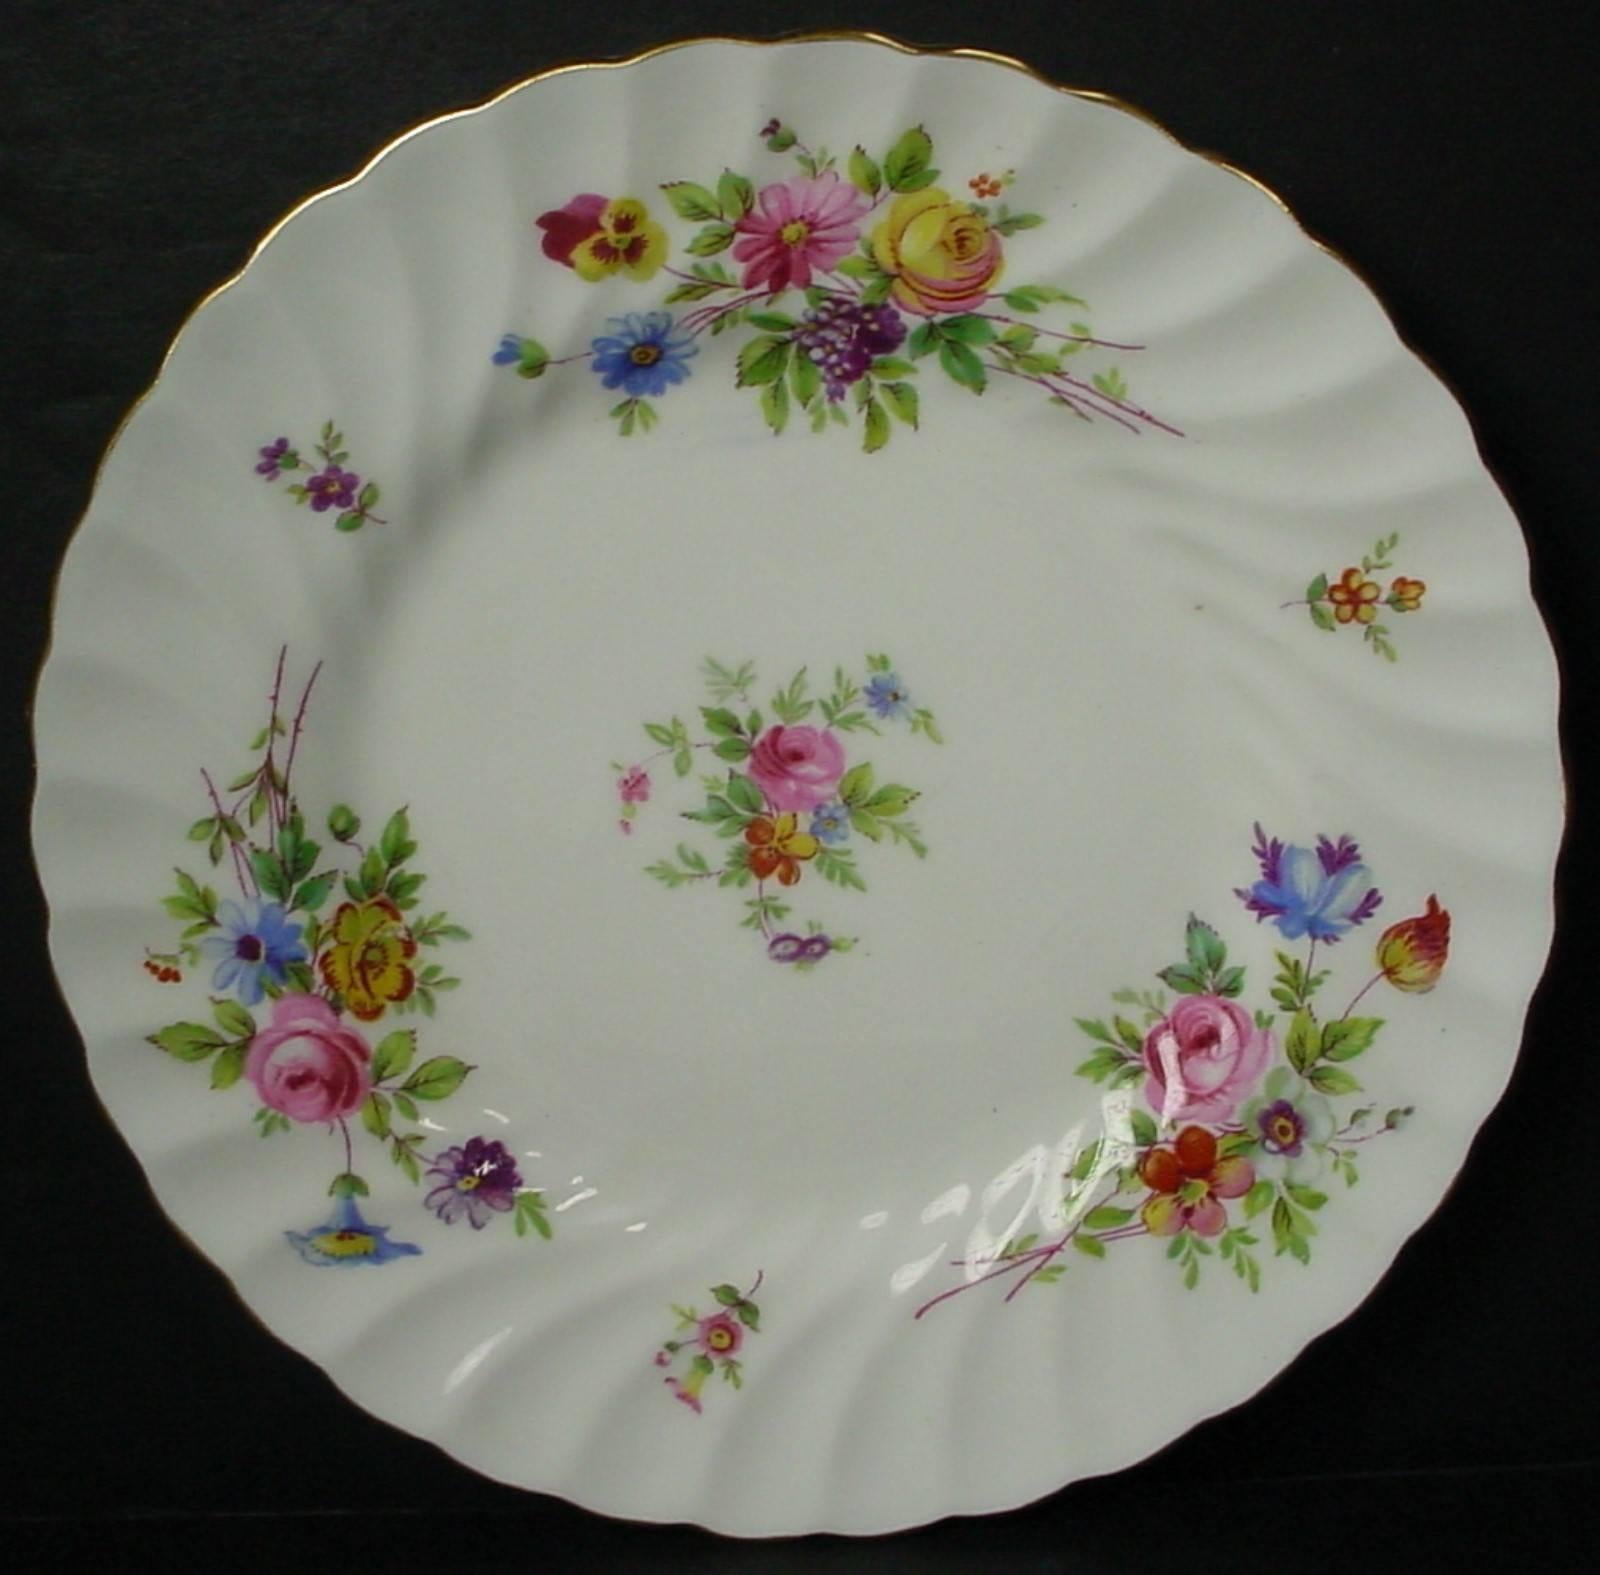 CHINA FINDERS

China, Crystal, Flatware and Collectible Matching Service is offering ONE (1) 

MINTON china MARLOW S309 pattern 60-piece SET SERVING for 12 TWELVE

in great condition free from chips, cracks, break, stain, or discoloration and